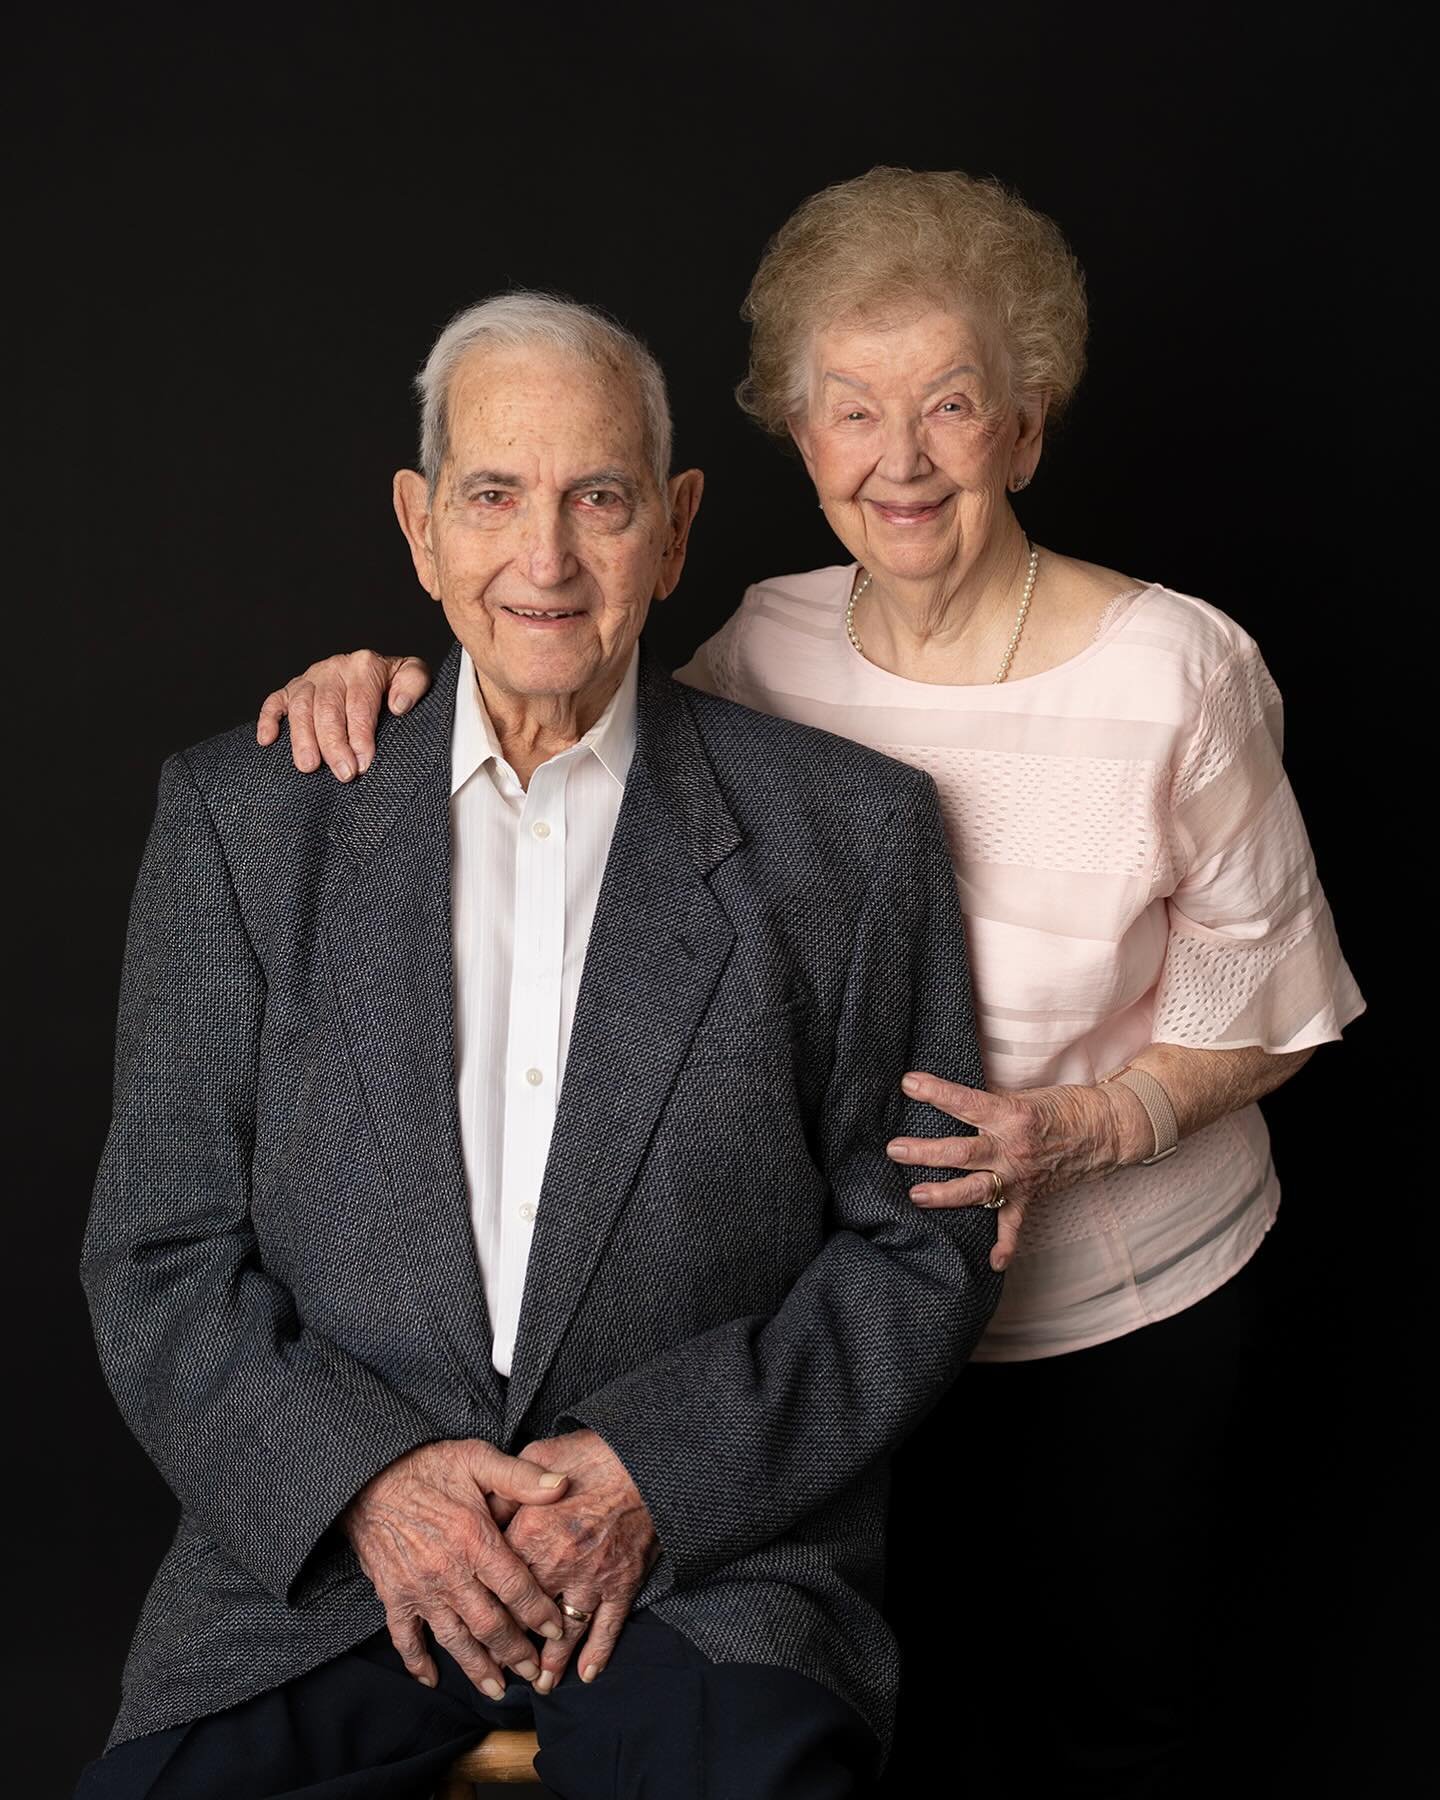 My amazing grandparents came into the studio today for updated portraits. It was the most beautiful thing I have ever had the opportunity to photograph. I can honestly say it was such an HONOR to have the opportunity to photograph my sweet Grandpa at